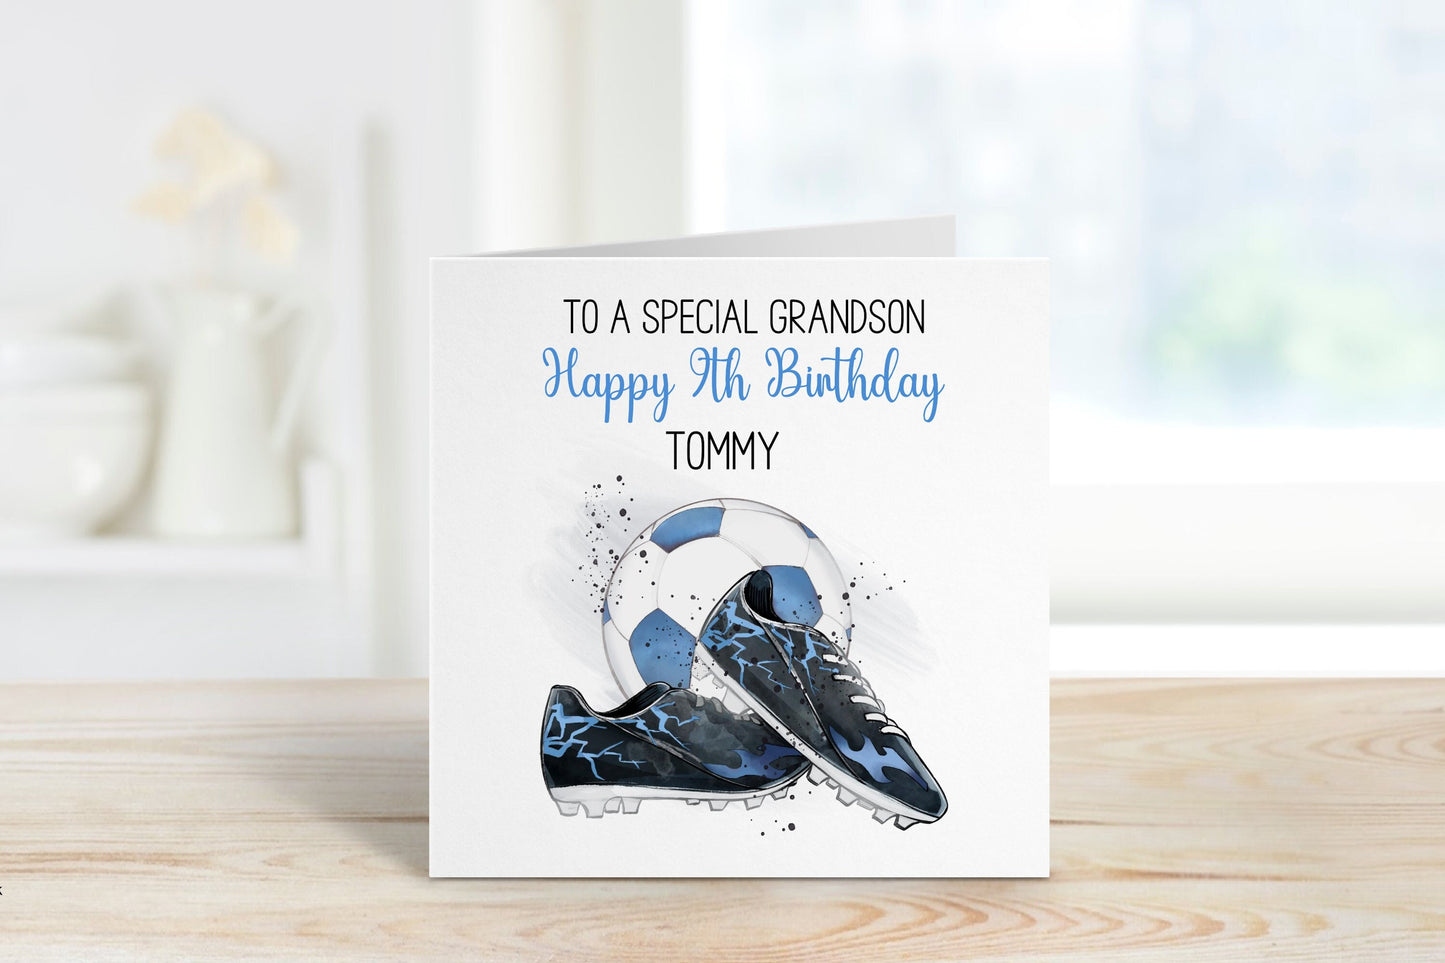 Personalised Grandson Birthday Card, Any Age Birthday Card For Grandson, 1,2,3,4,5,6,7,8,9,10